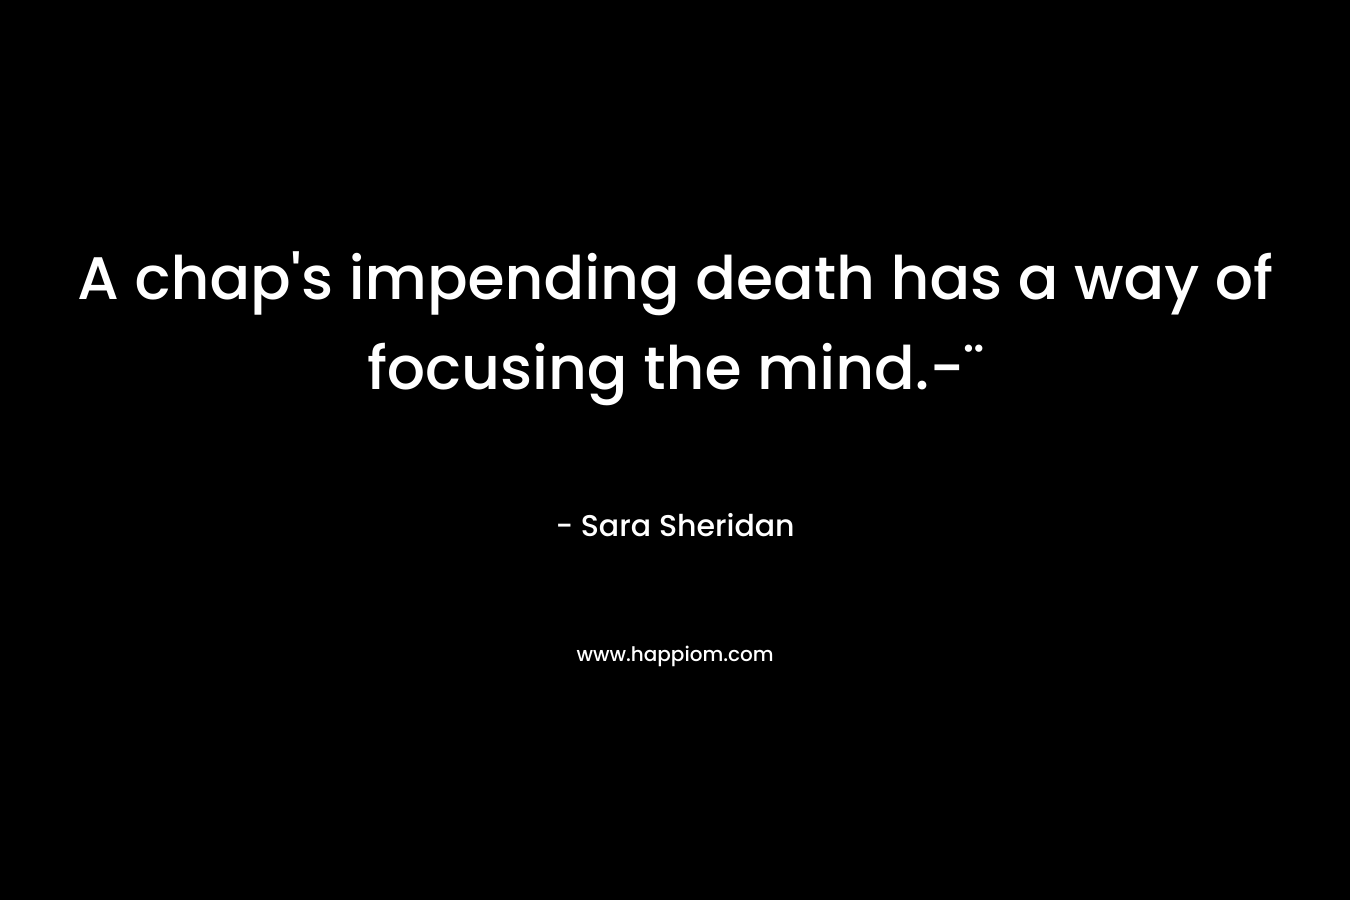 A chap’s impending death has a way of focusing the mind.-¨ – Sara Sheridan